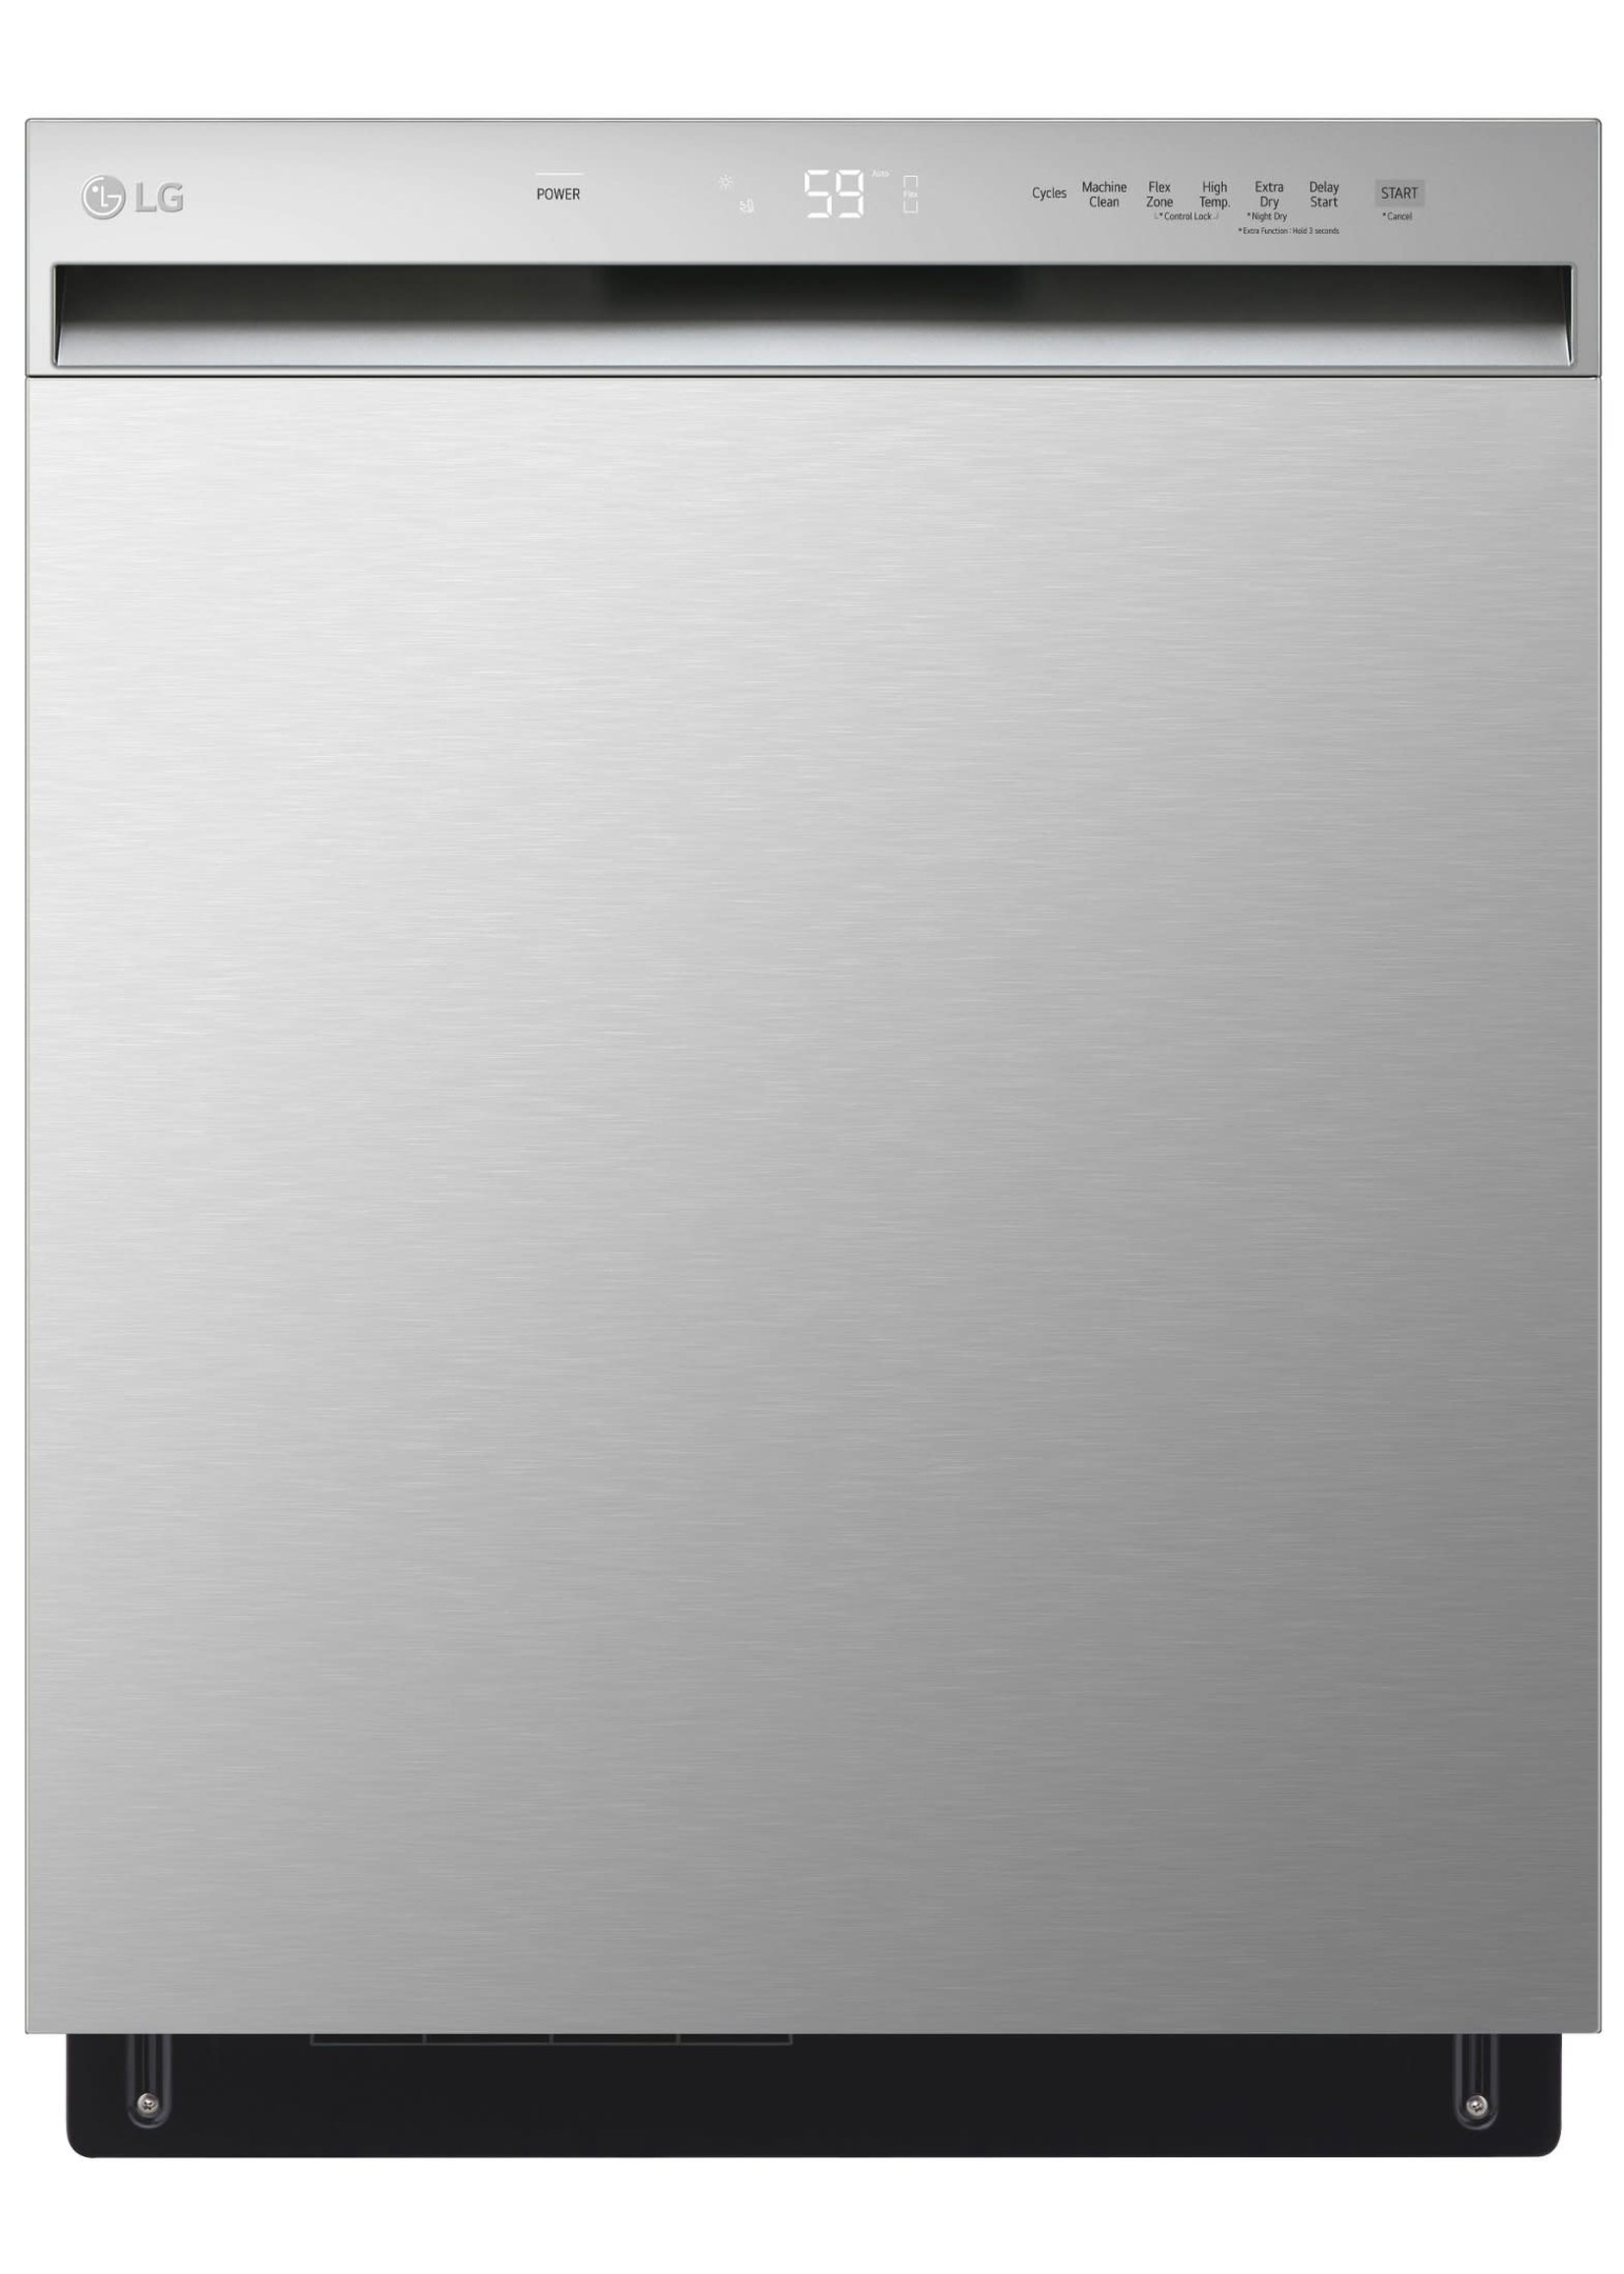 LG LG Front Control Dishwasher - Stainless Steel